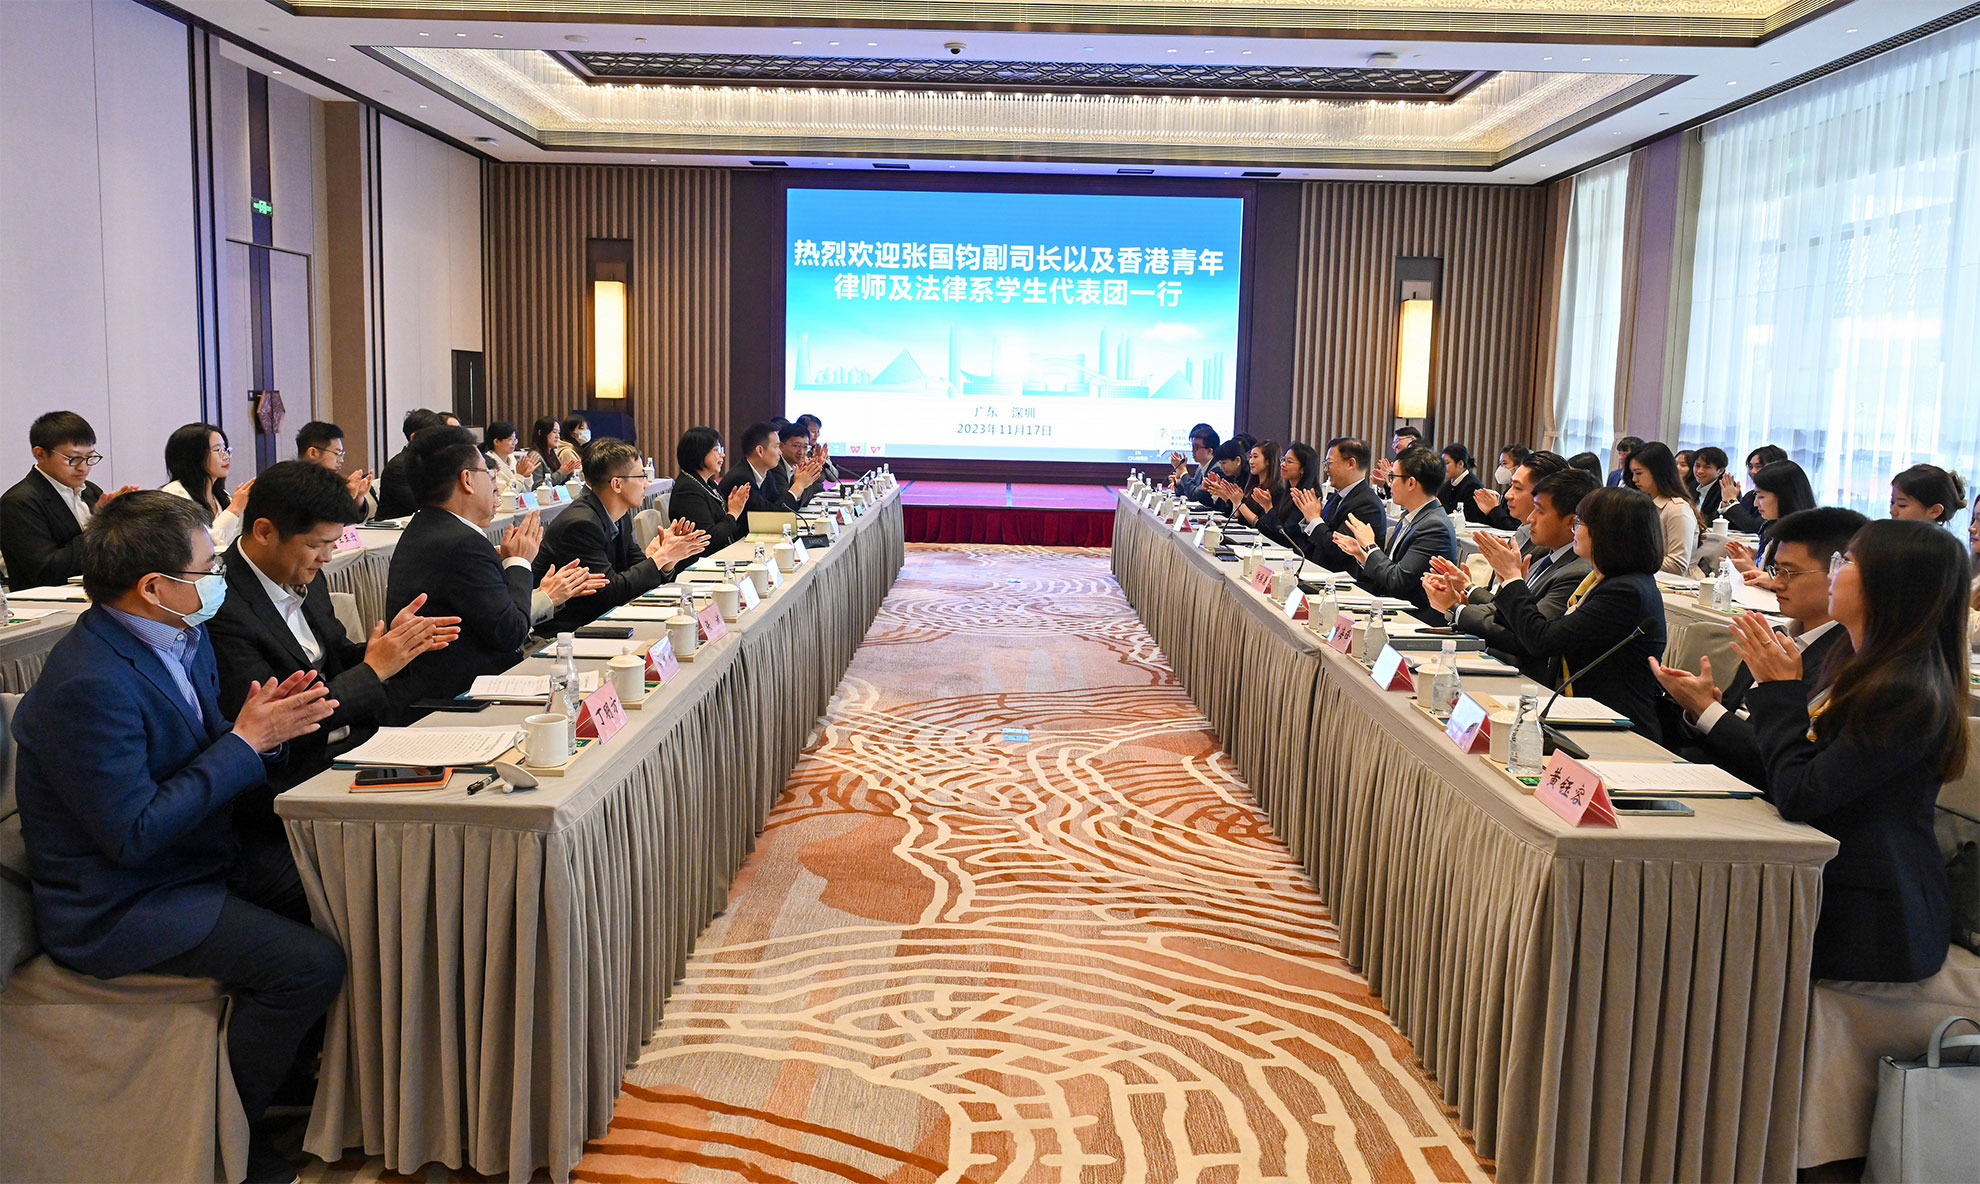 The Deputy Secretary for Justice, Mr Cheung Kwok-kwan, and a delegation of young lawyers led by him today (November 17) finished the first stop, Shenzhen, of their visit to Mainland cities of the Greater Bay Area. Photo shows Mr Cheung (seventh right) and other members of the delegation meeting with the Director of the Justice Bureau of Shenzhen Municipality, Ms Jiang Xiaowen (seventh left).